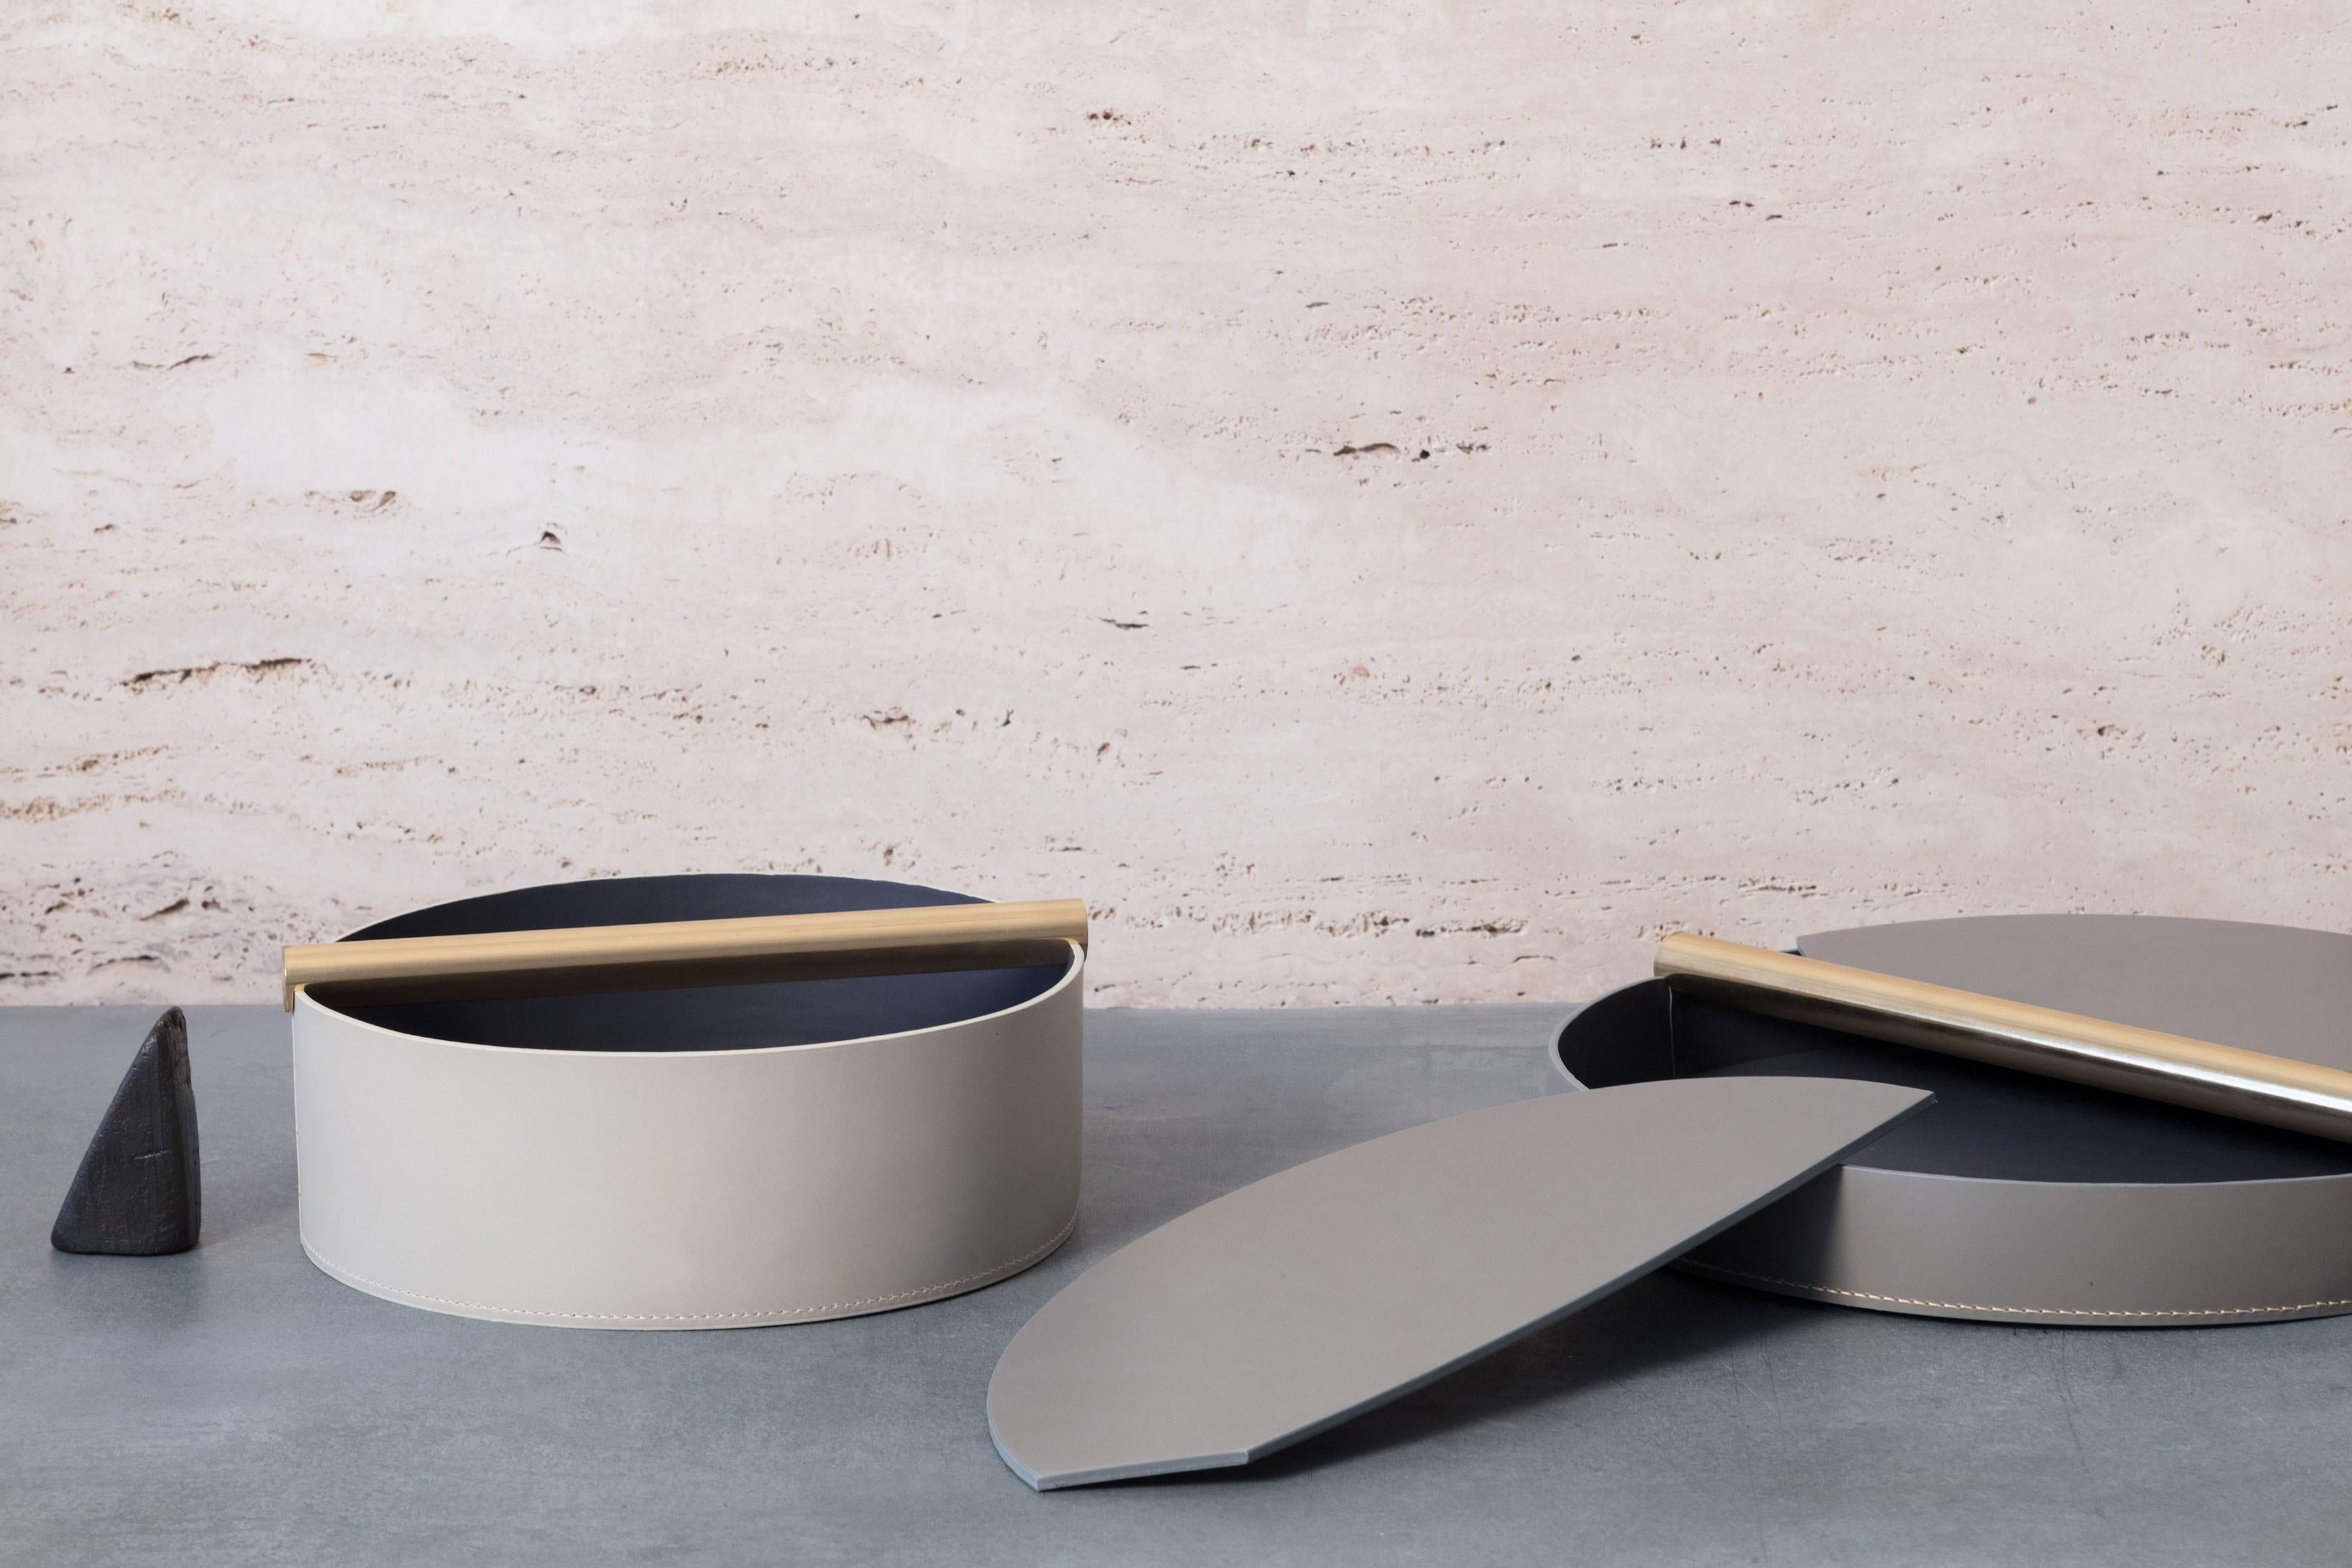 Part of Les Few's Julie collection, this contemporary, round, leather and brass, modern, minimalist centerpiece tray is made by artisans in Sweden. The leather centerpiece tray can be made in several color options with a polished lacquered brass